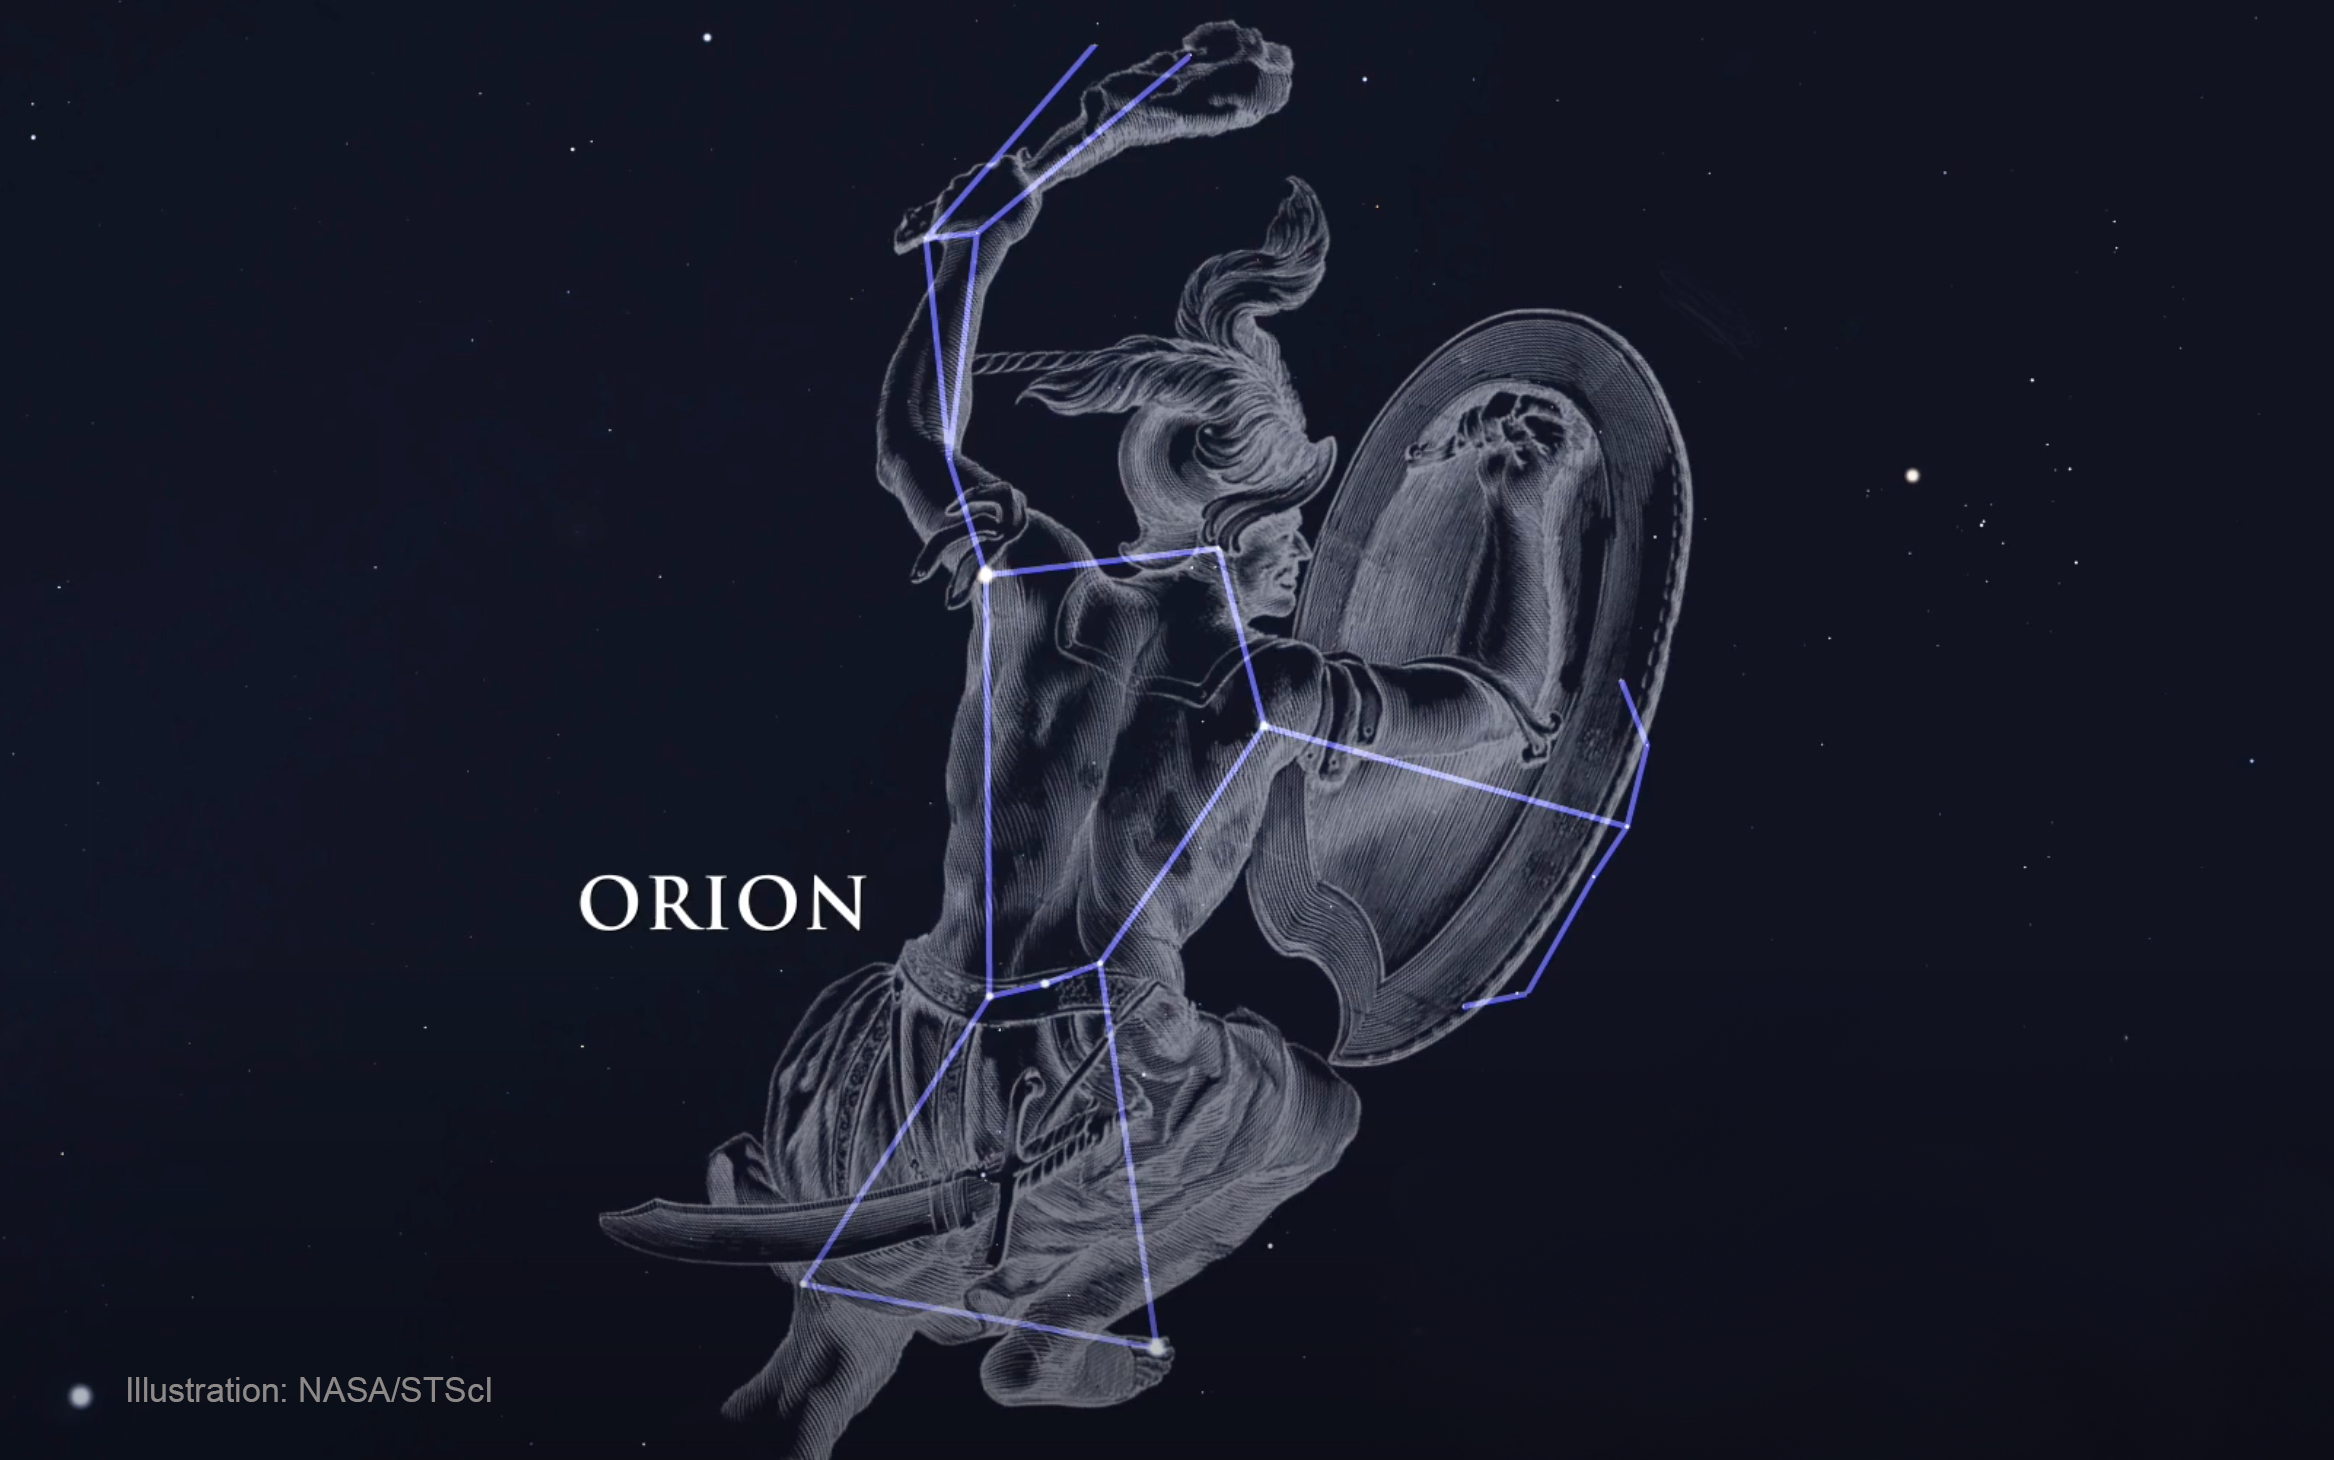 Illustration of the Orion constellation. This image is on a black background with stars sprinkled around the image. In the center there is a drawing of the mythological figure of Orion – a man wearing a feathered helmet, strips of metal across his back and wrapped around his upper arm, and a warrior’s defensive skirt. He holds a large oval shield in his right hand and a club in his left. There is a long sword hanging from his belt. In addition to the realistic drawing of the man, the main stars are shown and connected by lines. The image is watermarked with, “Illustration: NASA/STScI.”